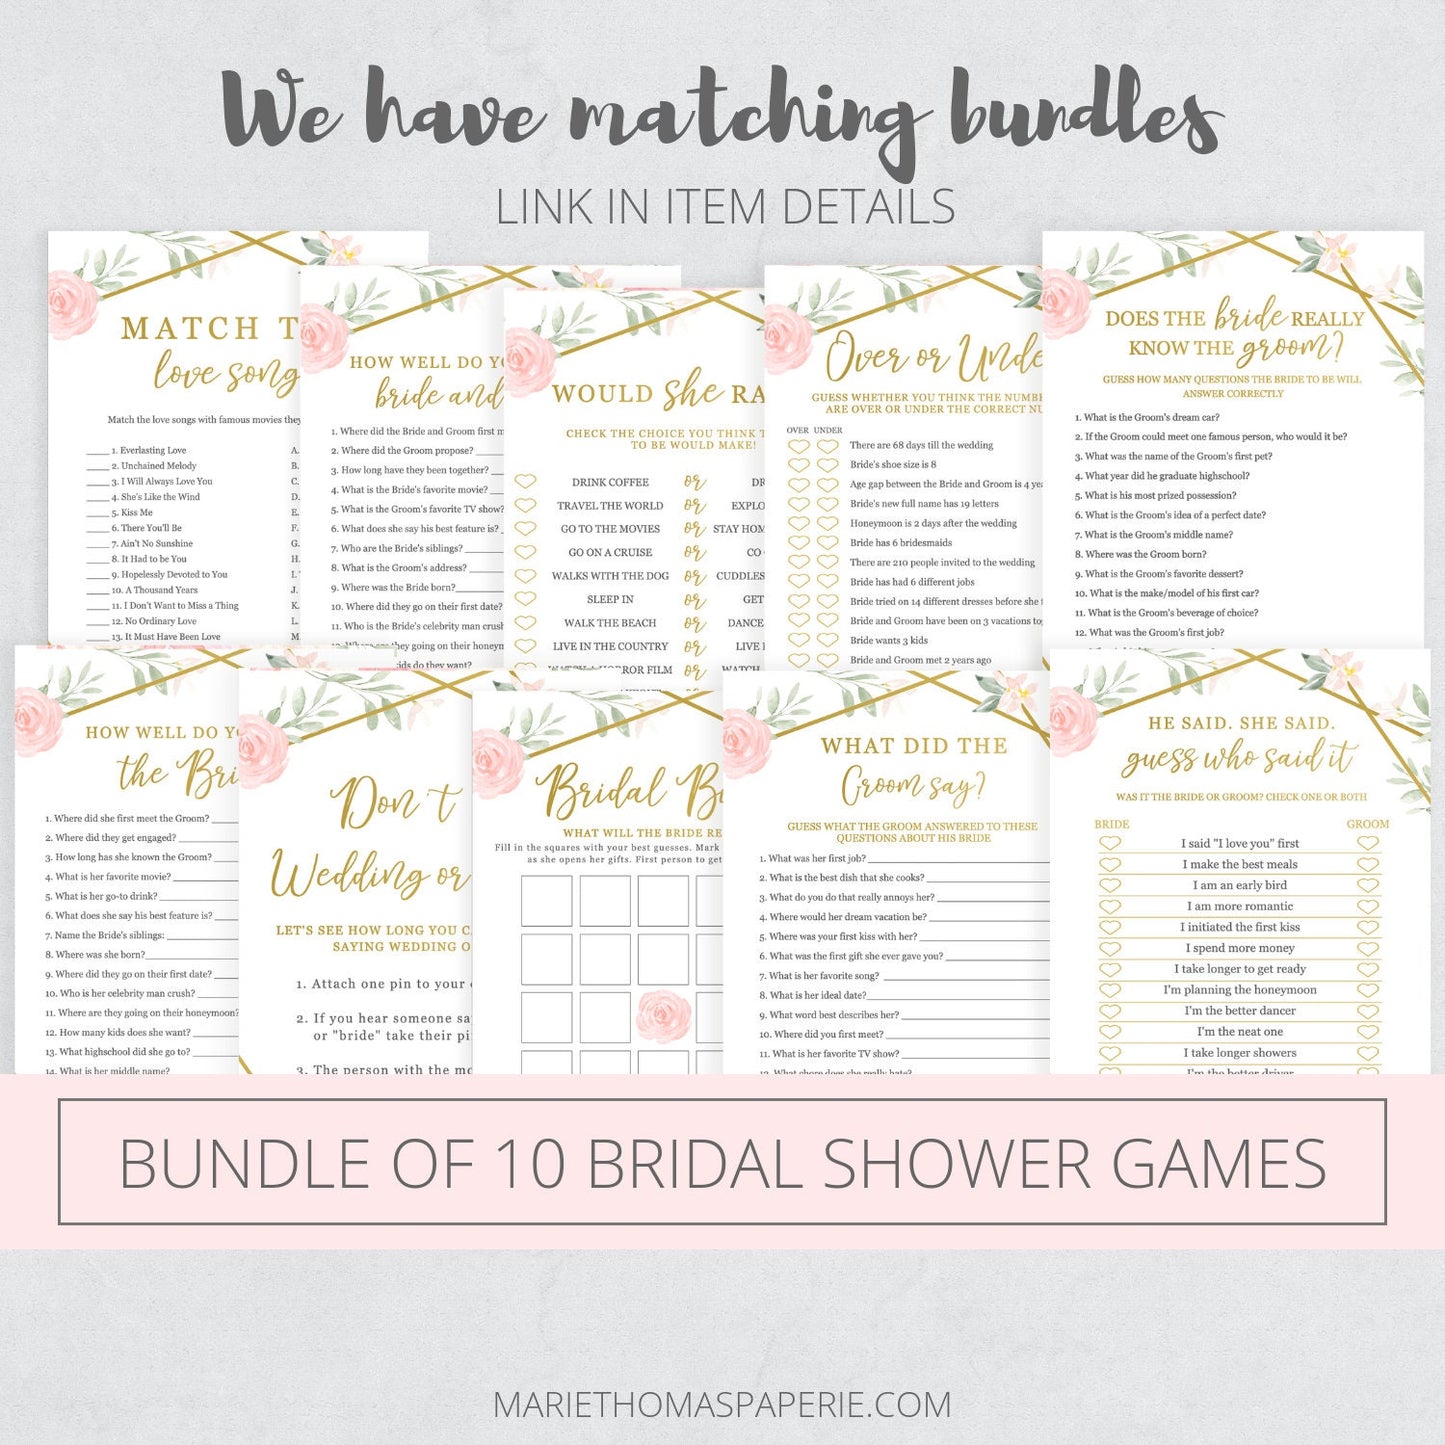 Editable Match the Love Songs Bridal Shower Games Wedding Game Bridal Game Geometric Template